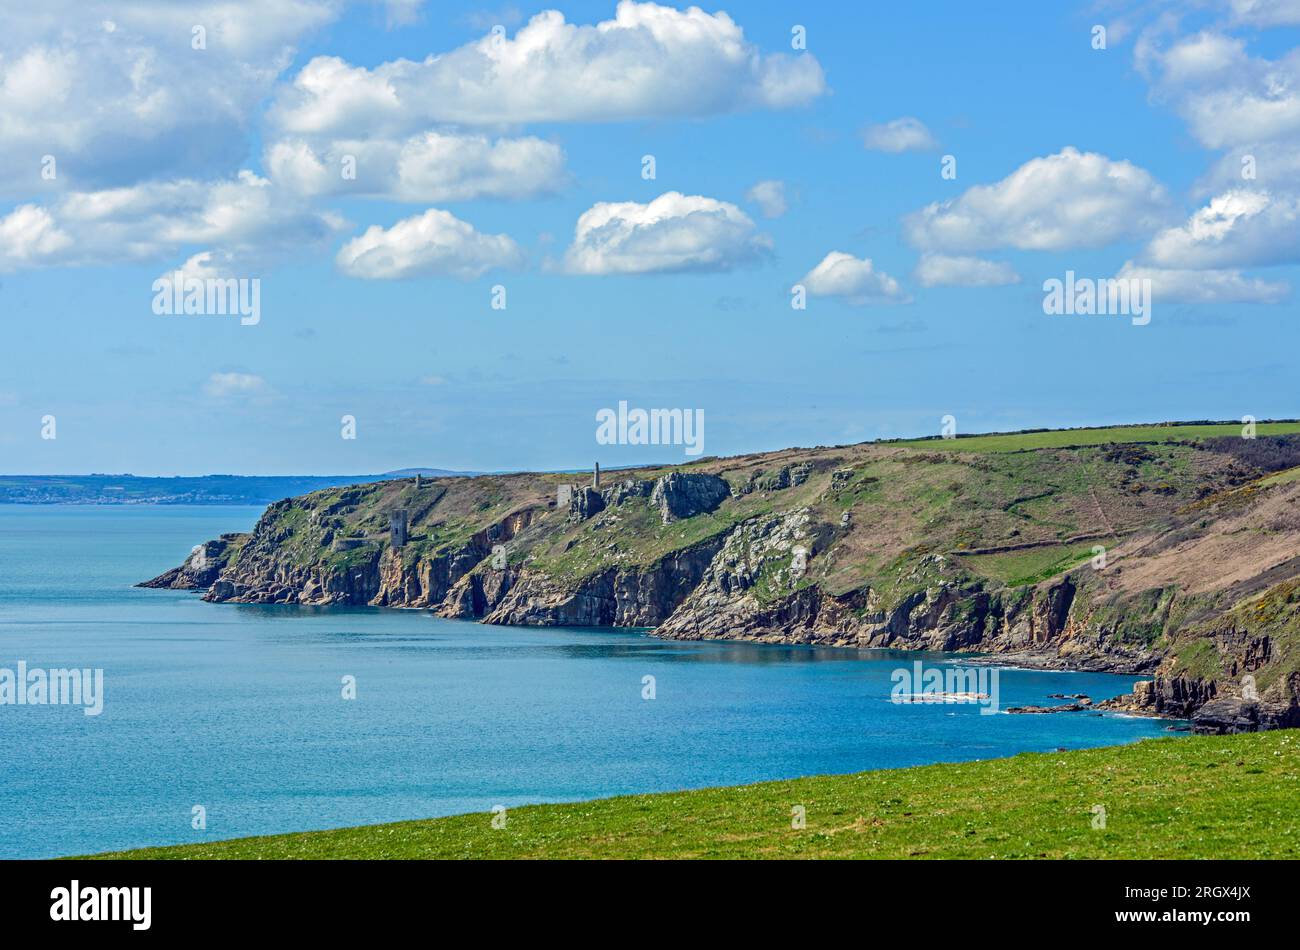 The Coastline around Trewavas Head near Porthleven, shoing the remains of old copper mines on the cliff edges, Cornwall Stock Photo